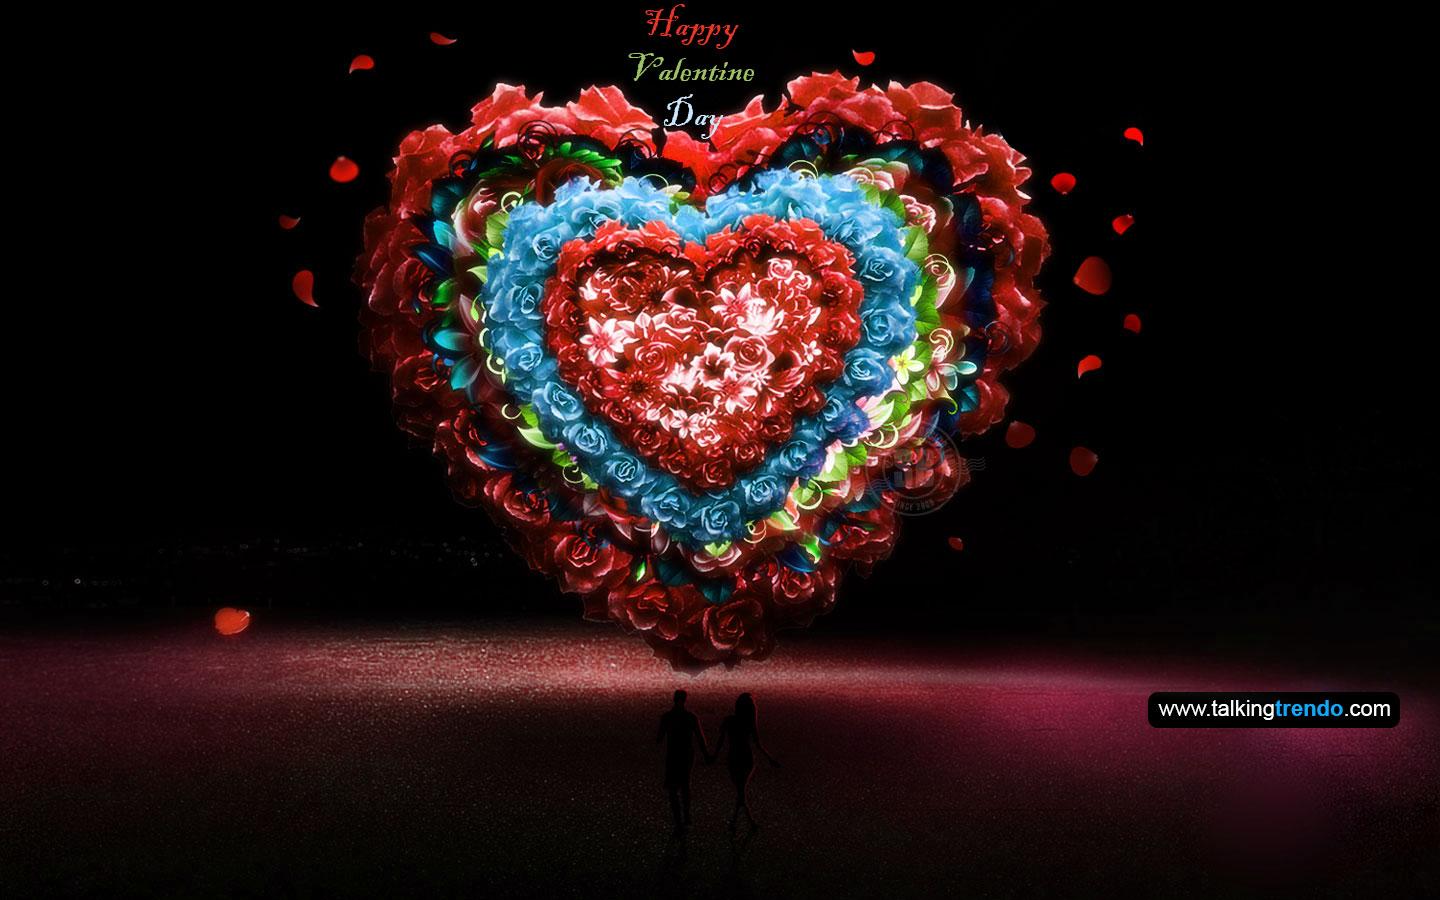 Download Wallpaper of Valentine Day 2018. HD Image and Photo